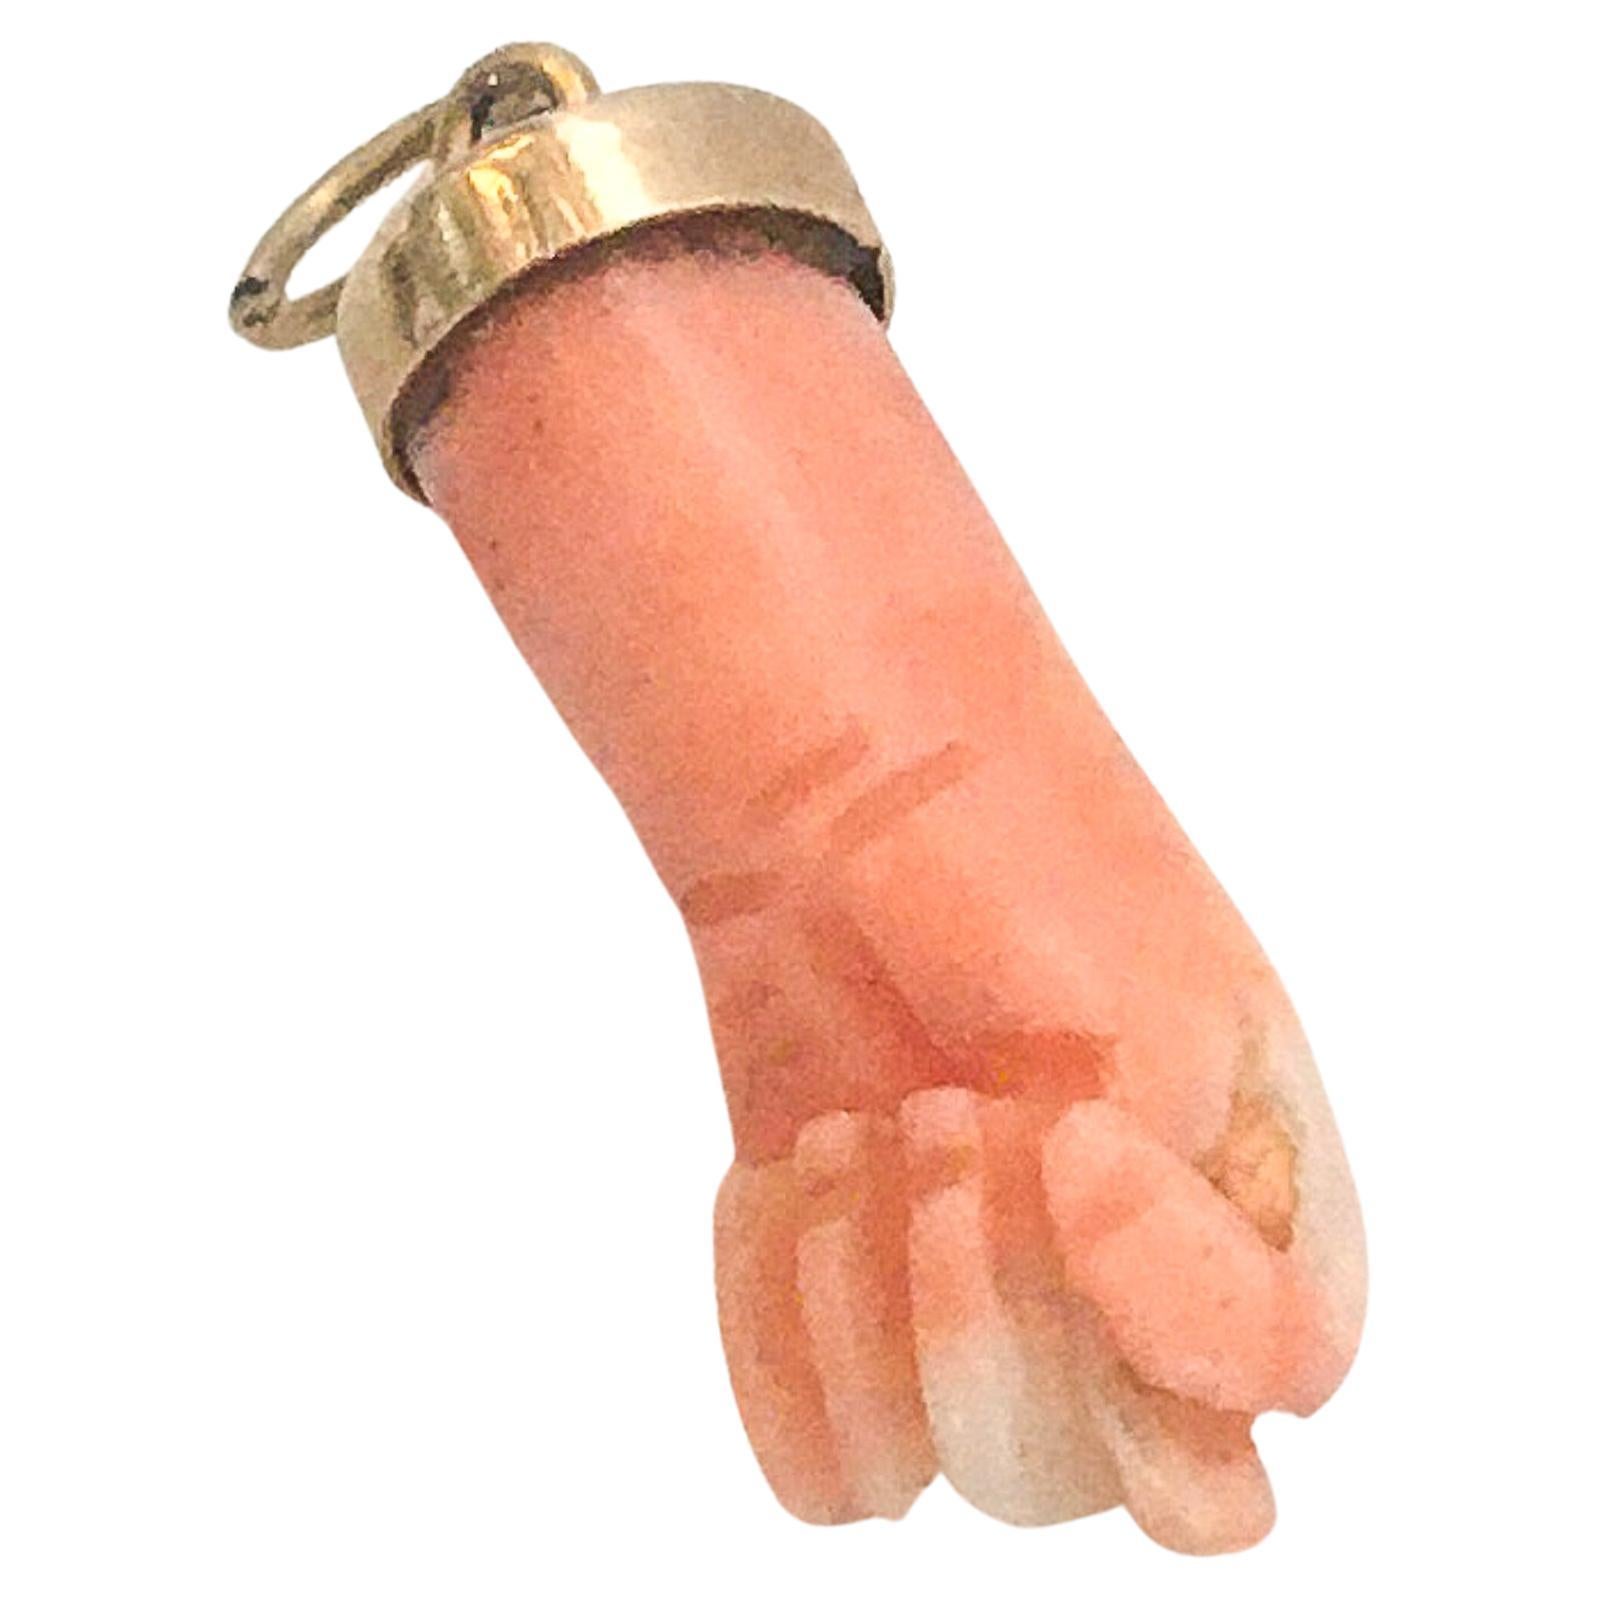 A vintage coral figa hand charm set with a 14 karat gold bail. The hand has beautiful engraved details. The charm is great worn alone or layered with your other favorites. The charm comes without the necklace. 

The figa hand symbol dates back